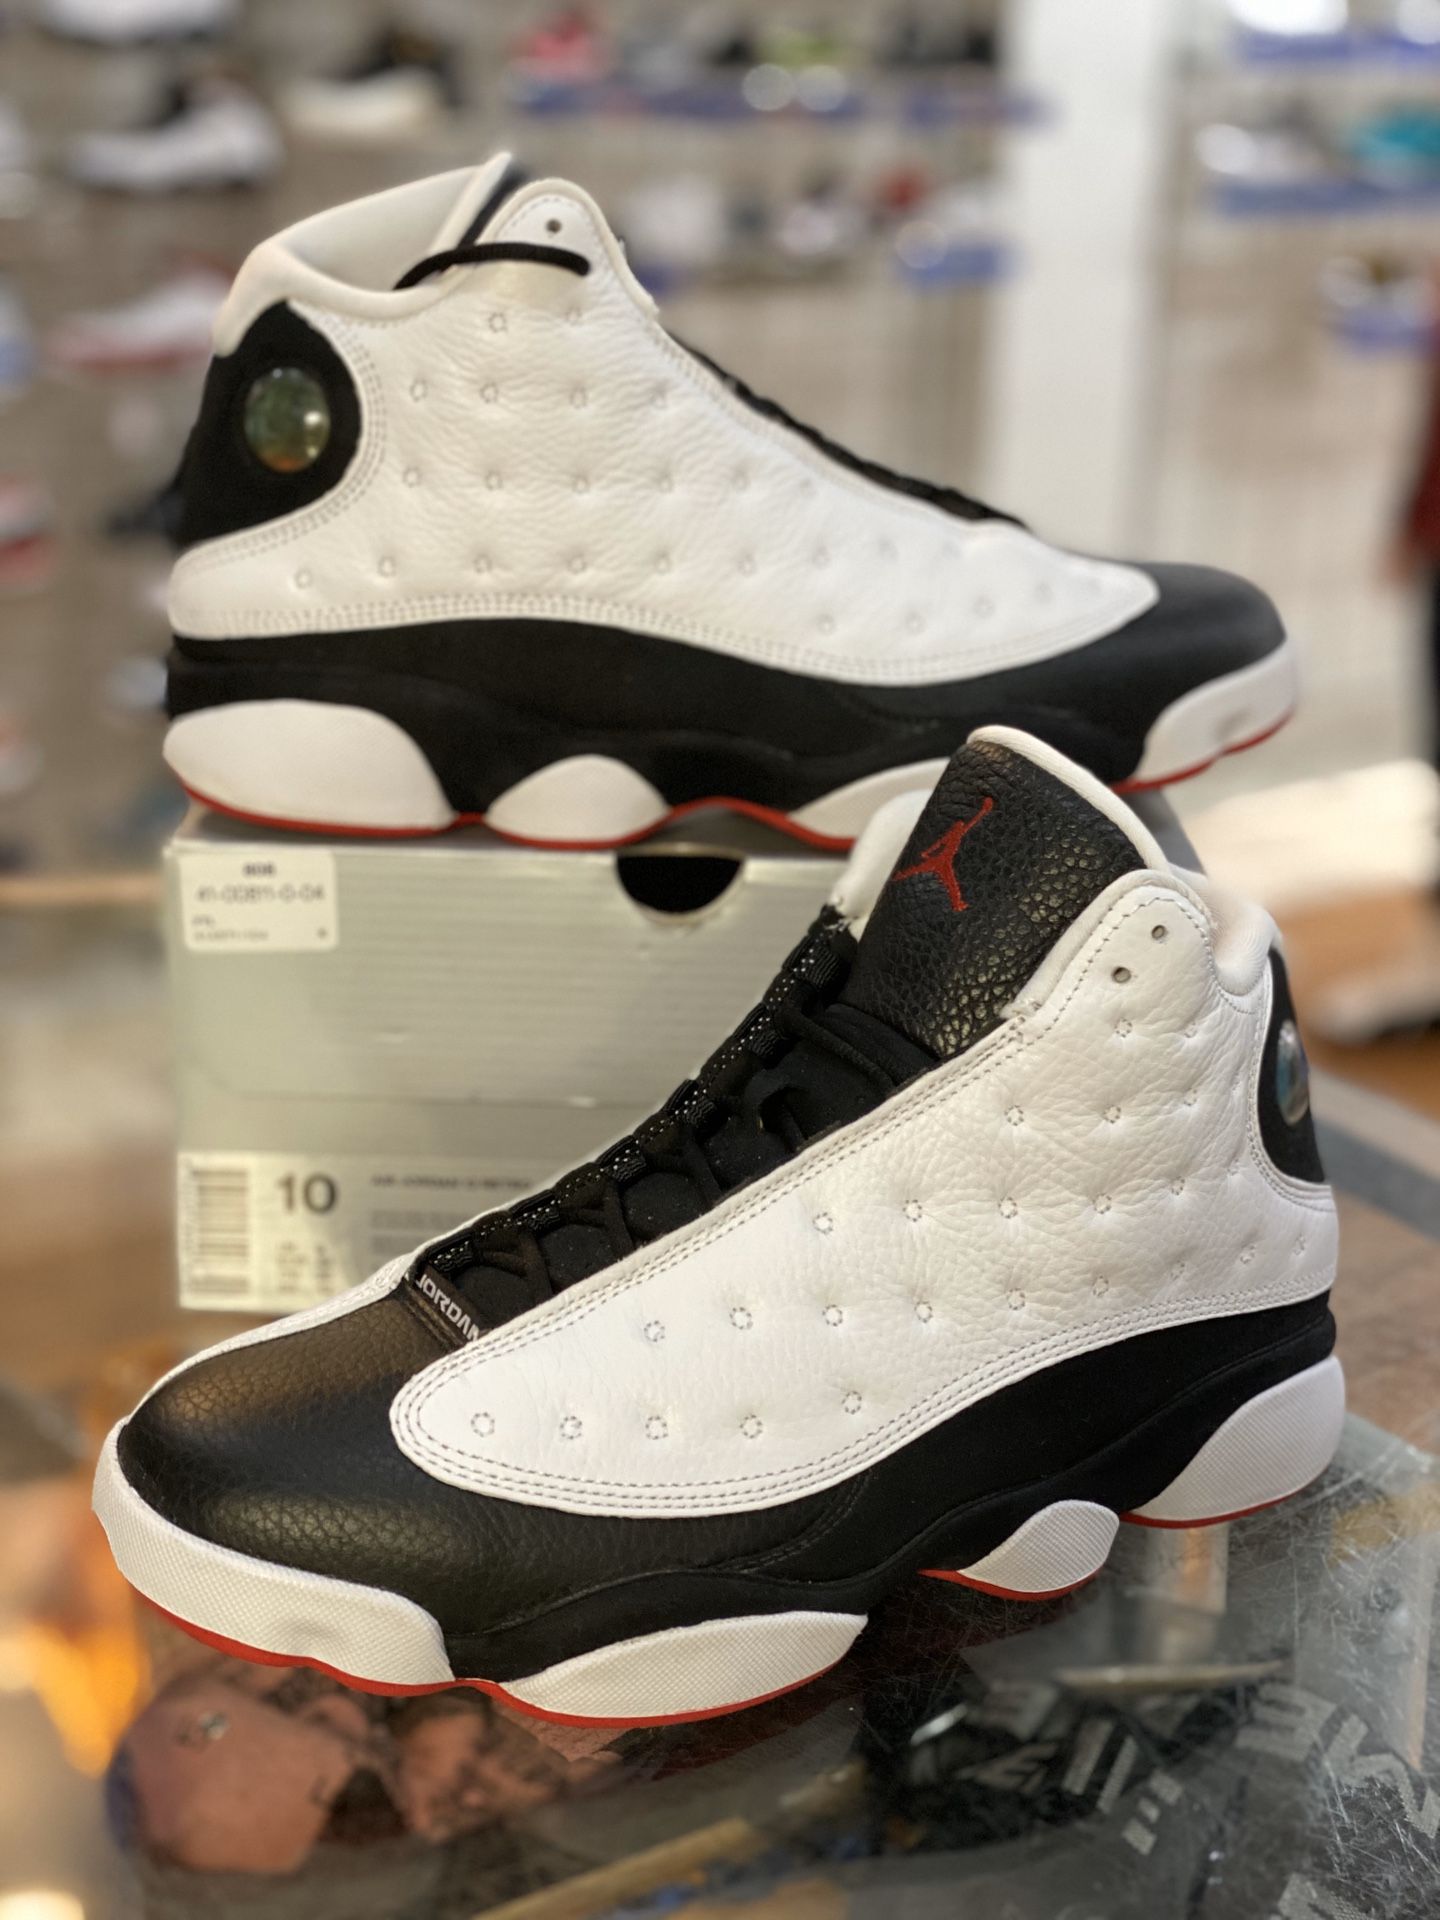 He got game 13s size 10